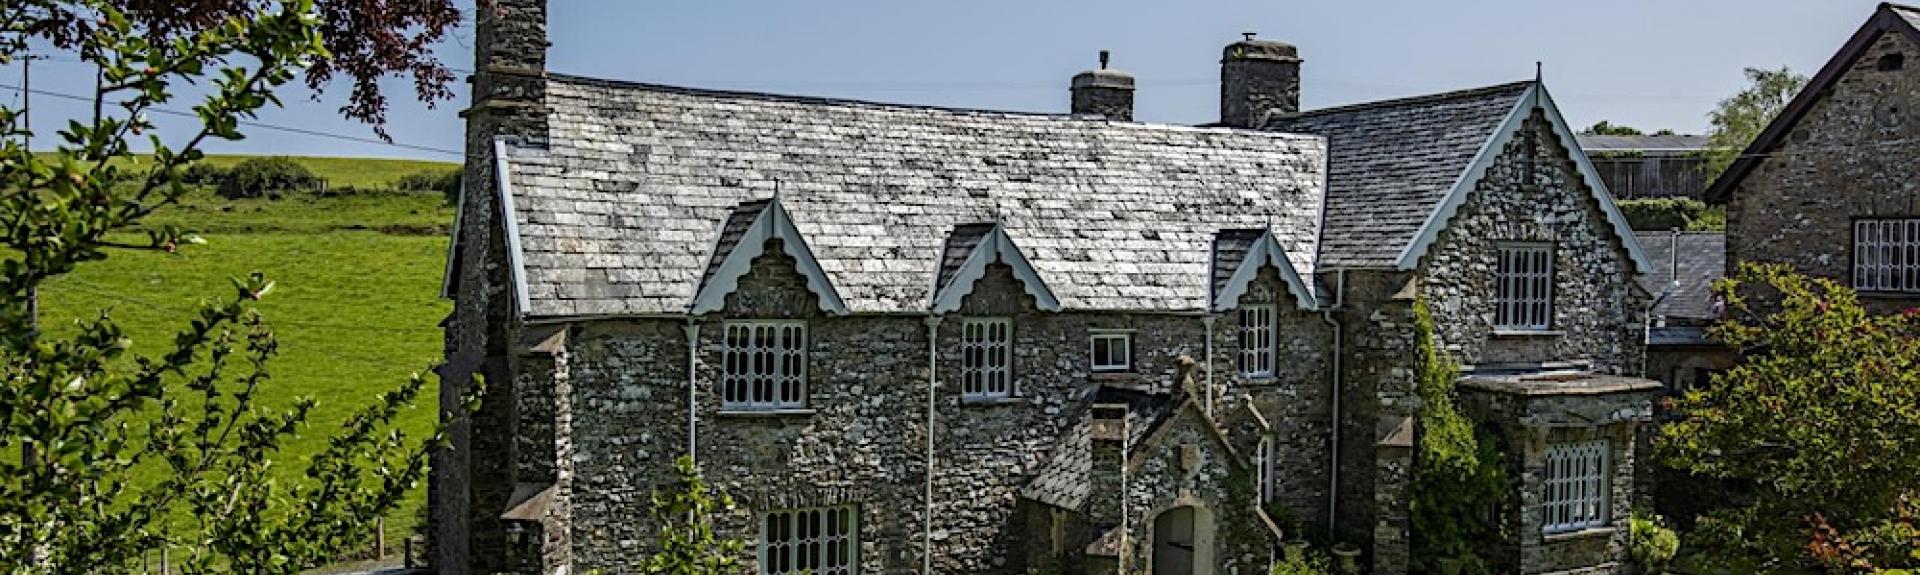 A large stone-built Exmoor cottage surrounded by trees and open fields.